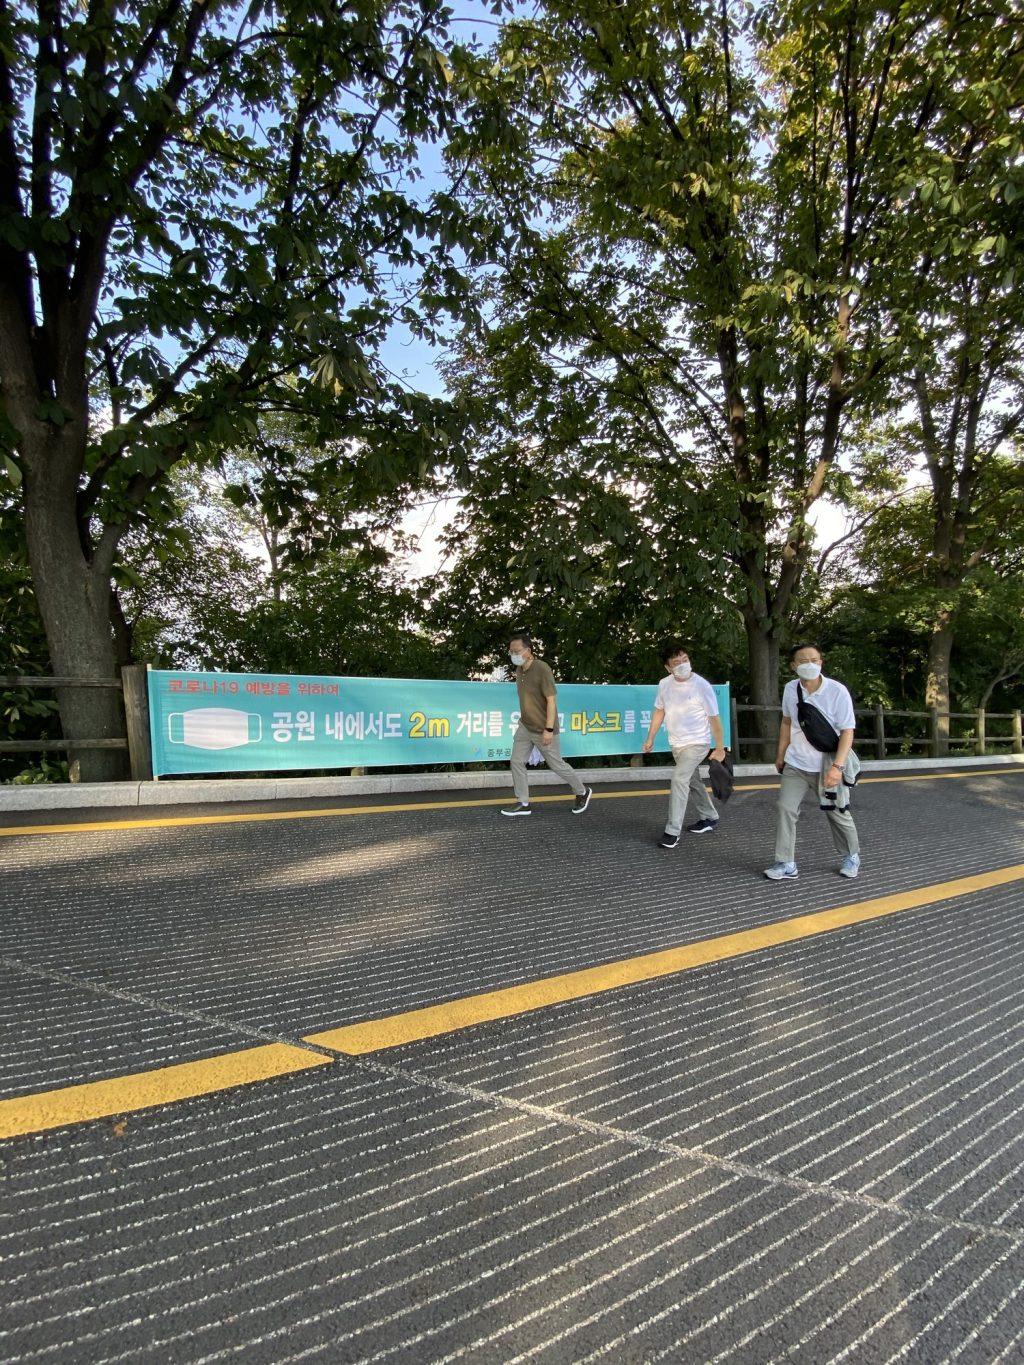 Three men wear masks while walking in front of a banner that reminds the public of the COVID-19 precautions. Similar forms of this banner were placed along both sides of the road with occasional hand sanitizers on small stools.